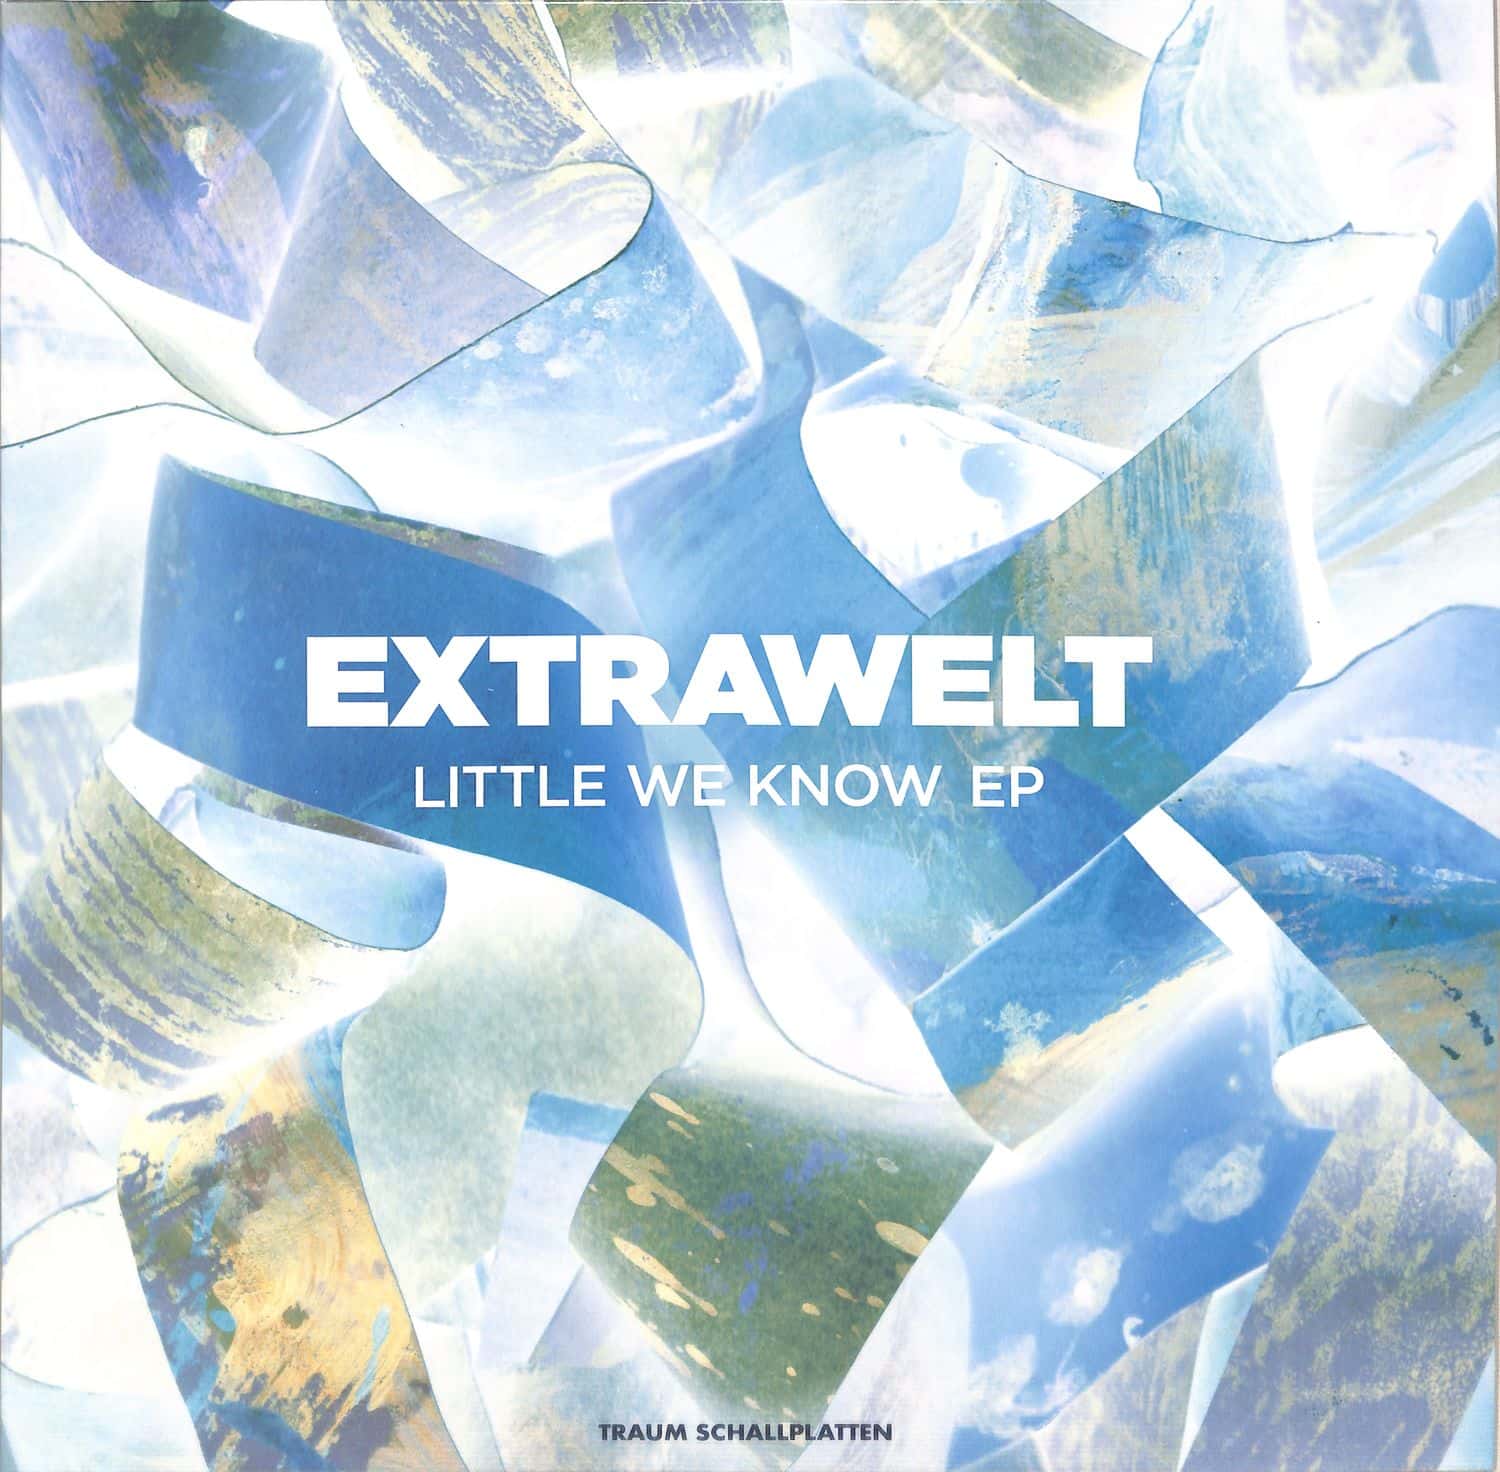 Extrawelt - LITTLE WE KNOW EP